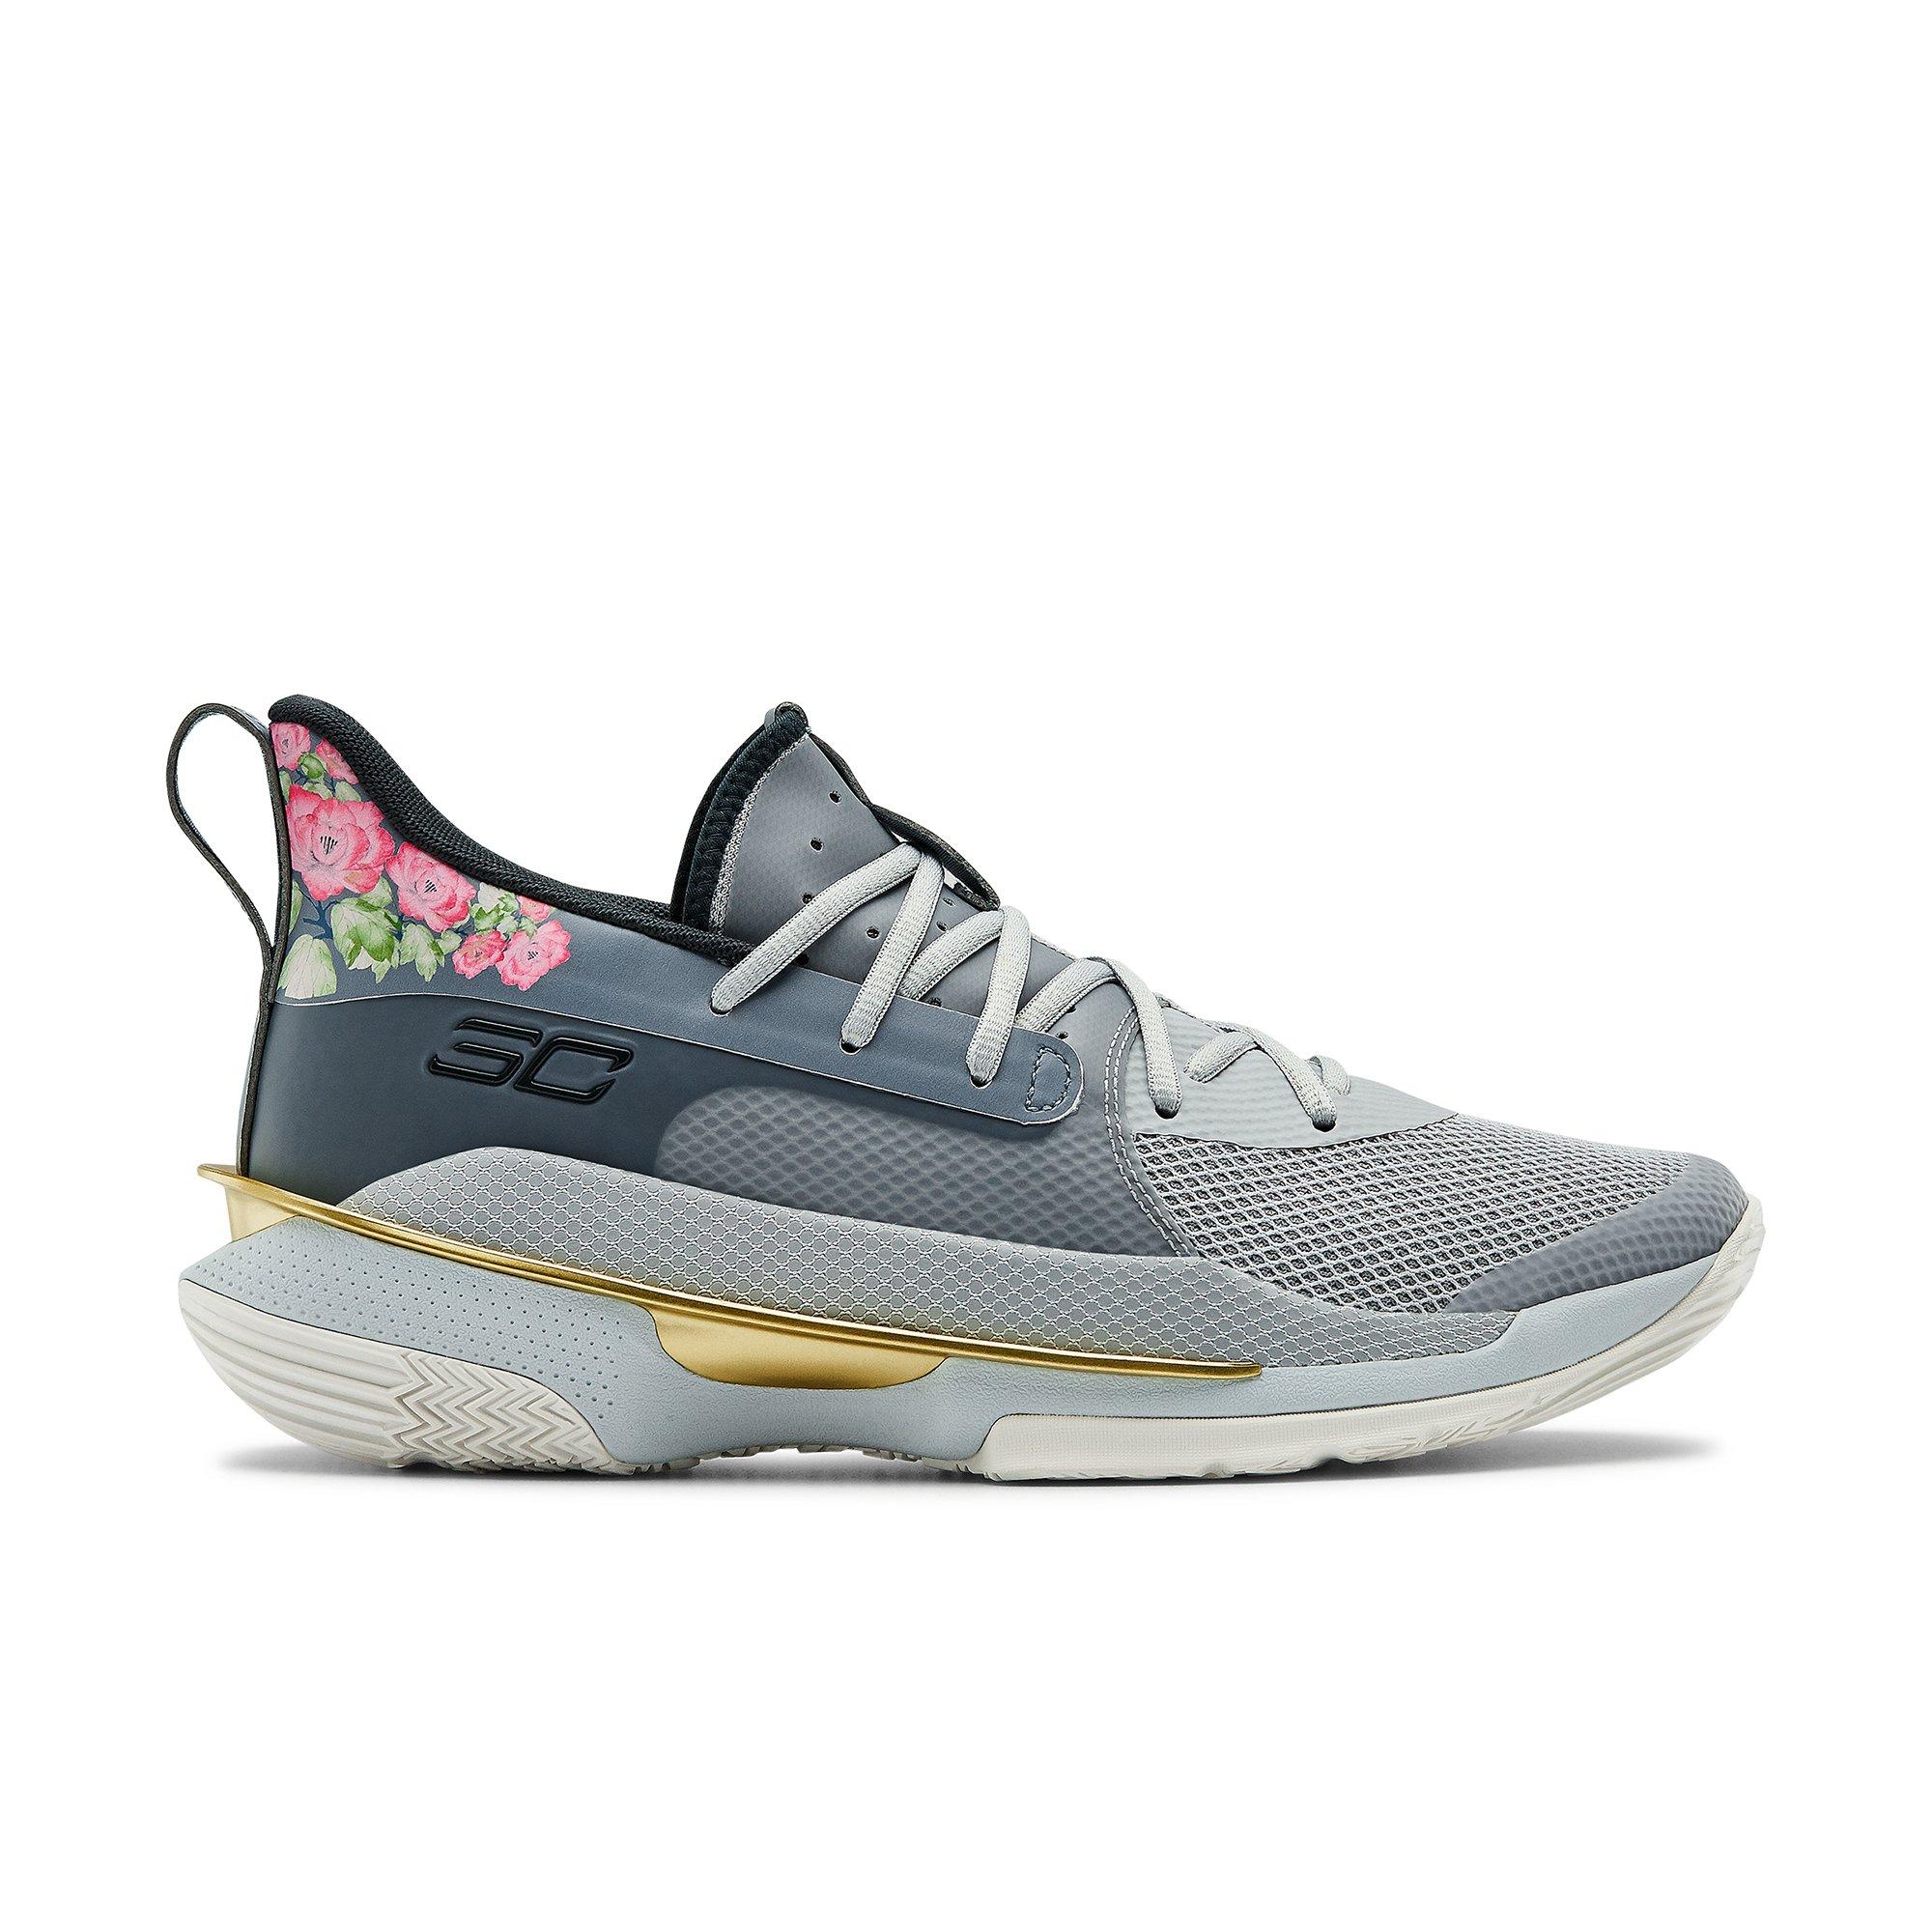 2020 Hot Fashion！Men's Under Armour Curry 1 TRAINING Low Basketball Shoes